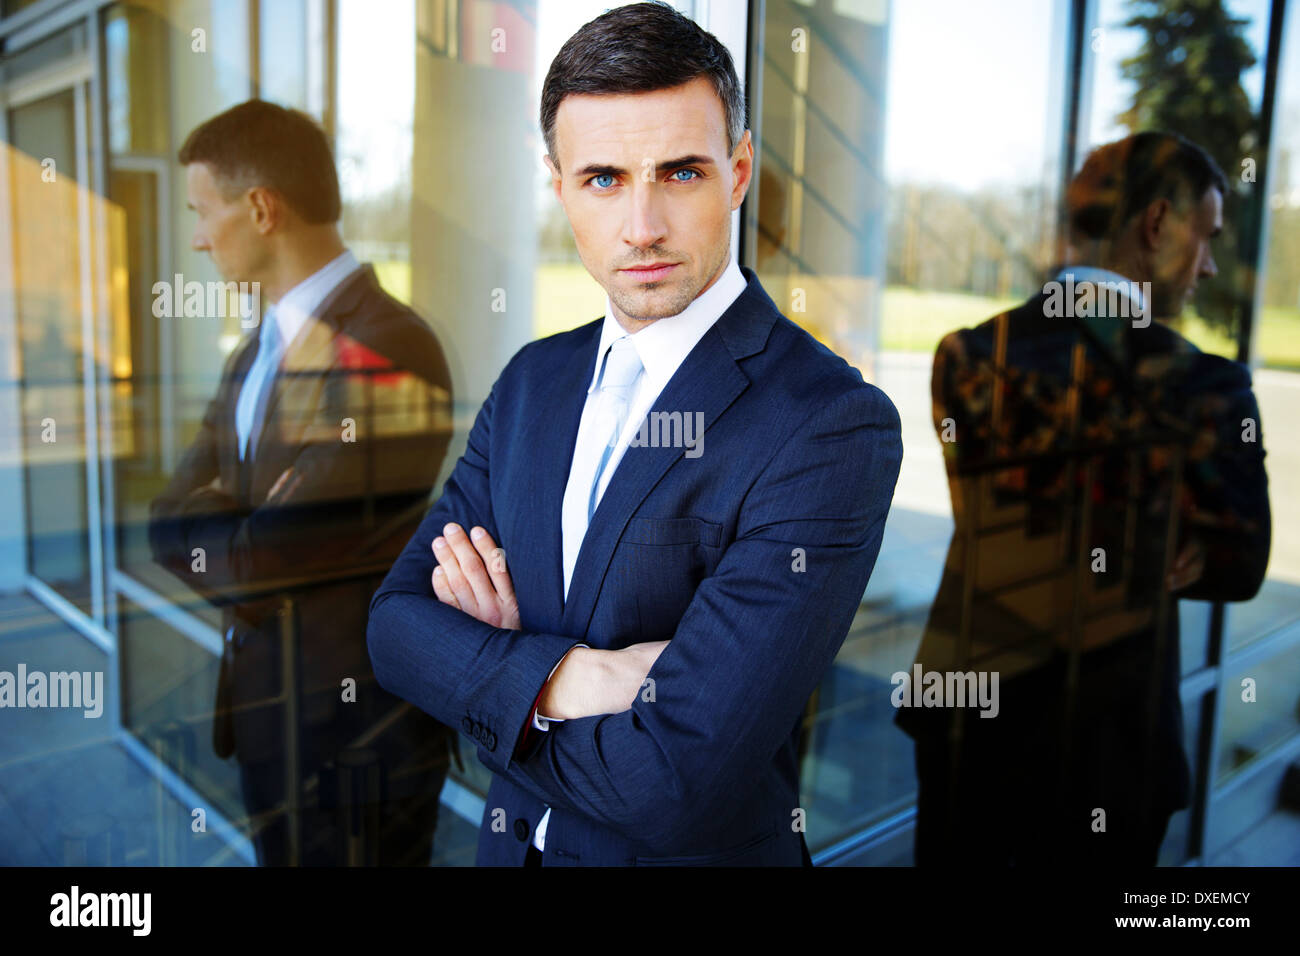 Portrait of a confident businessman standing with arms folded Stock Photo